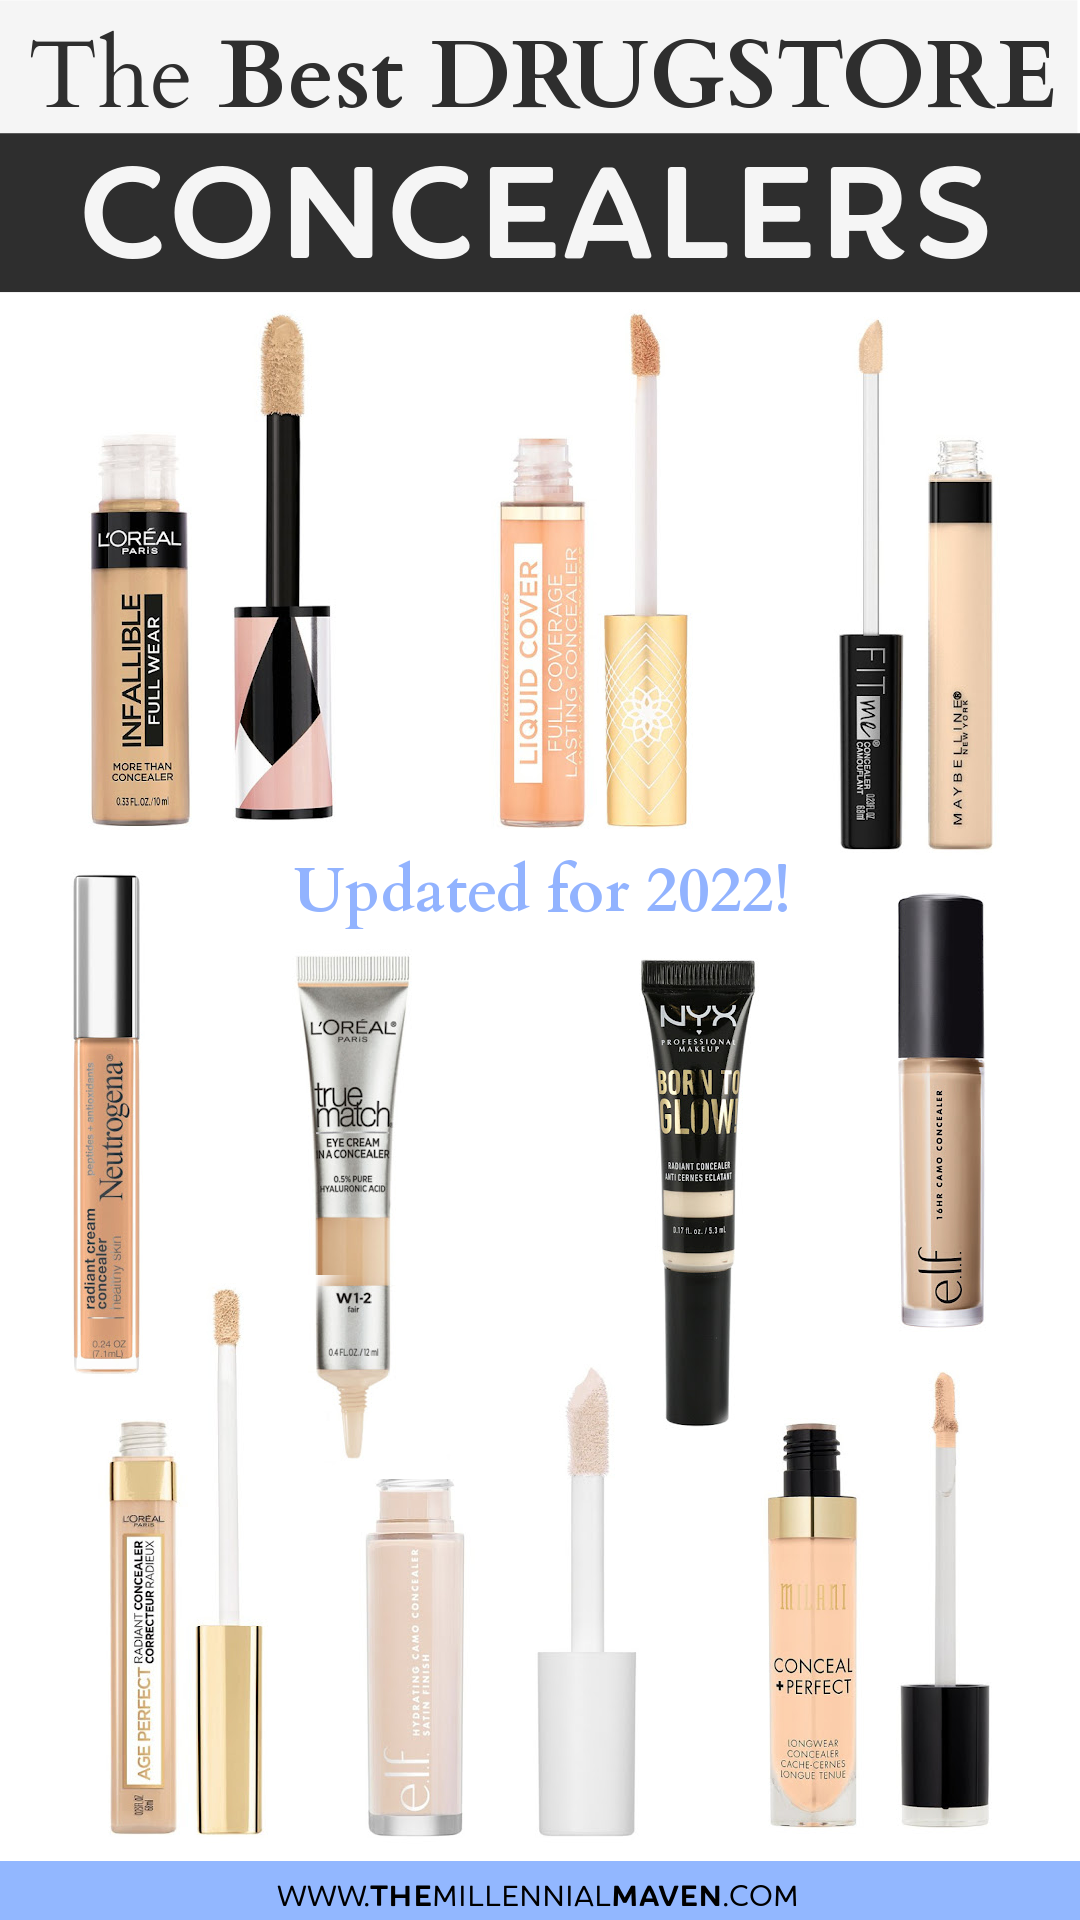 Top Best Concealers At The Drugstore in 2022! | Best Drugstore Concealers | The Millennial Maven